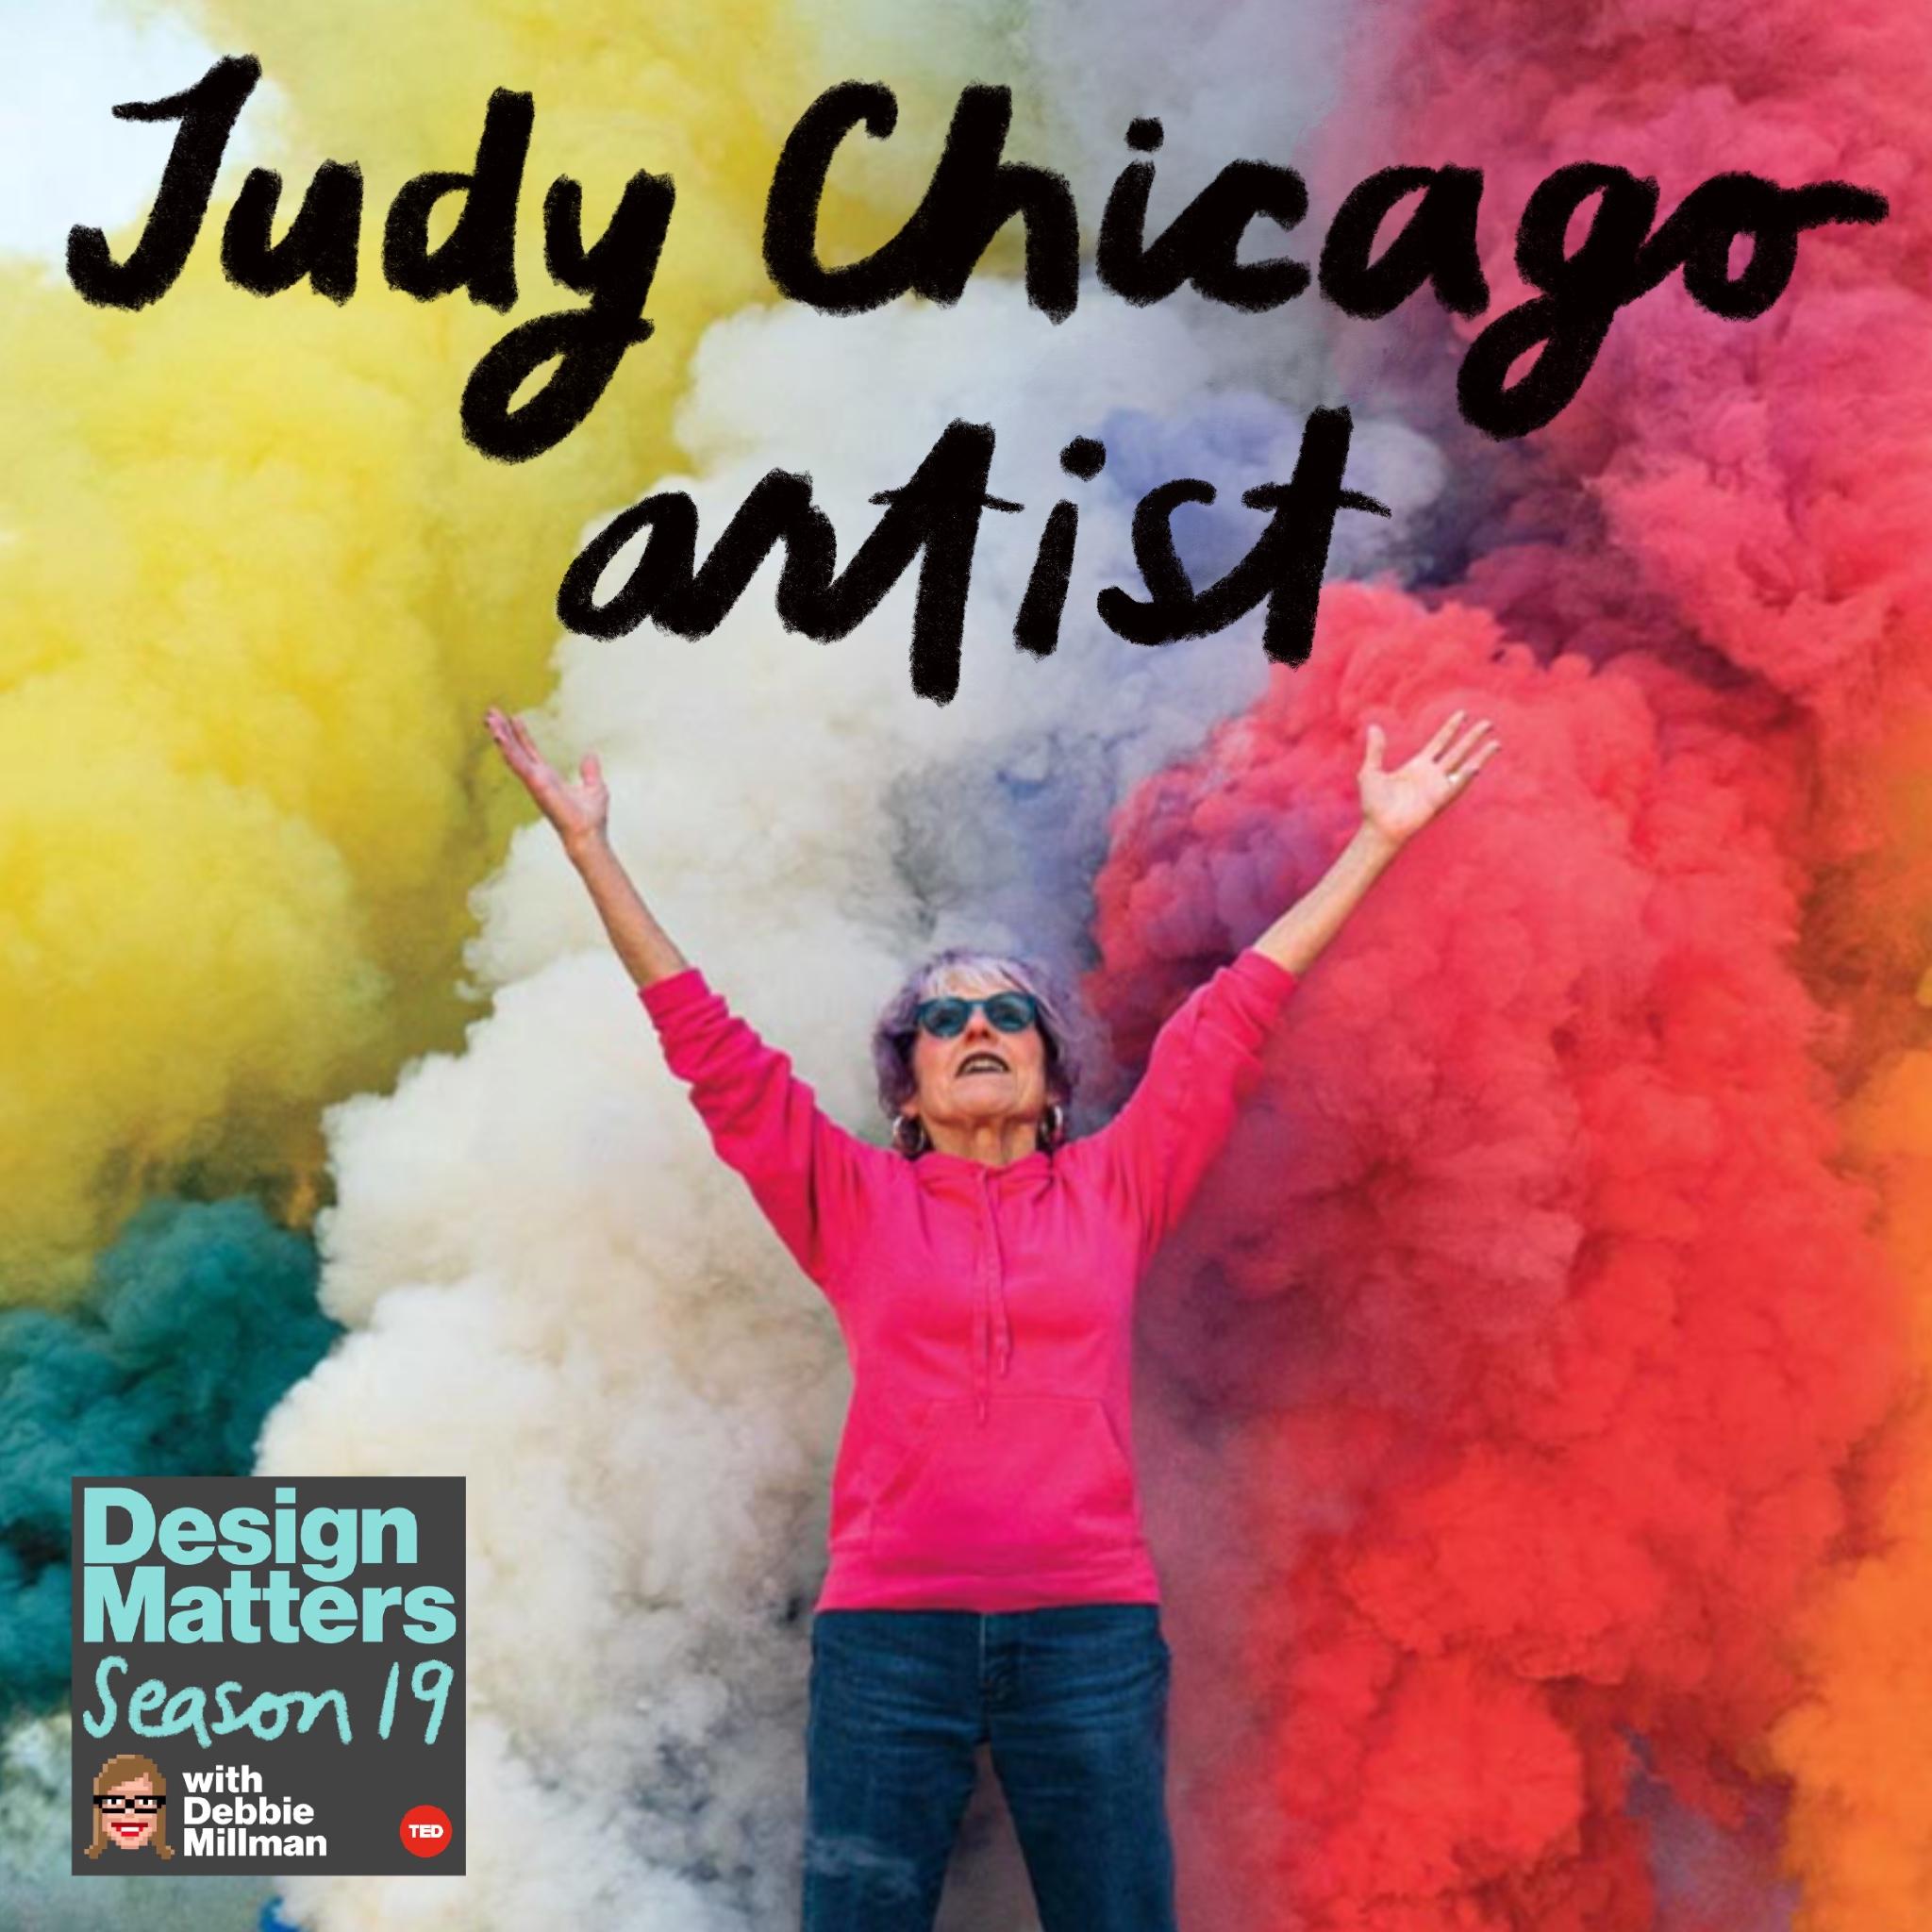 Thumbnail for "Judy Chicago".